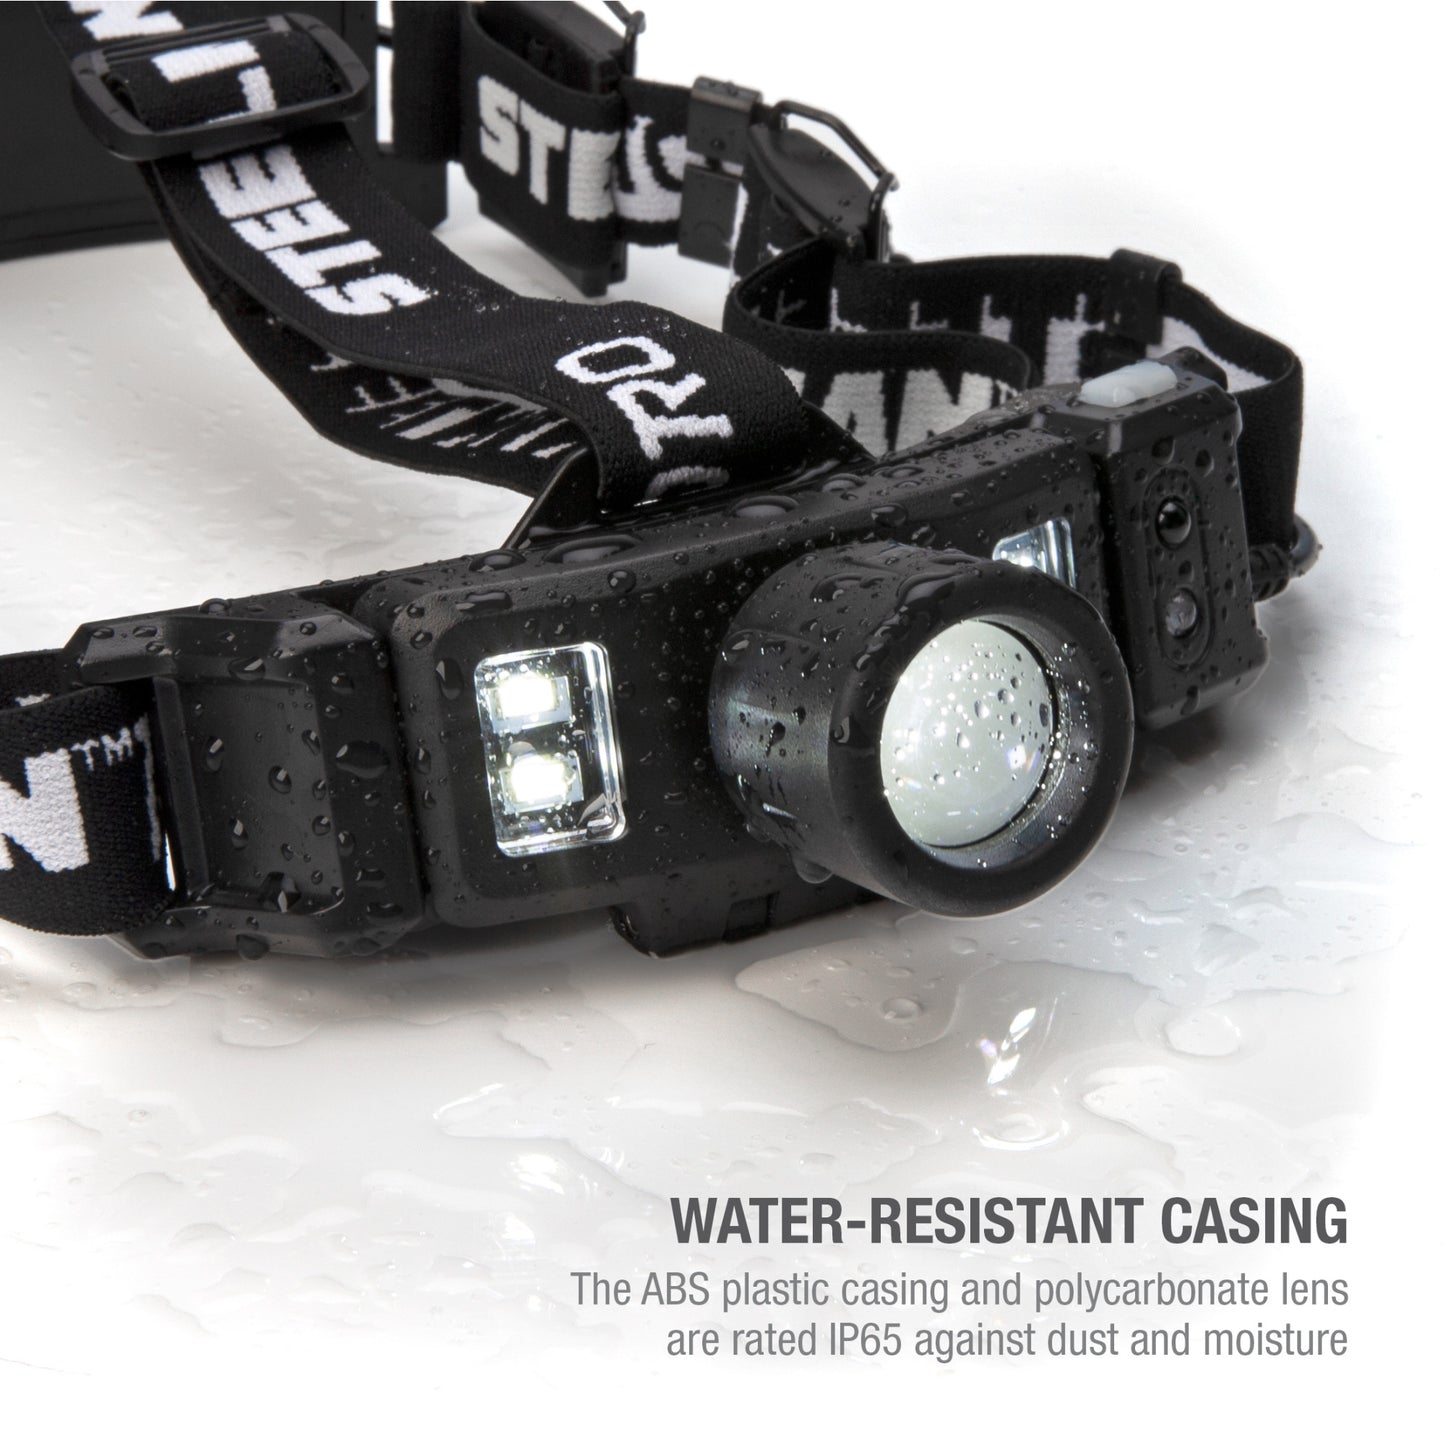 Motion-Activated Rechargeable Focusing Headlamp with Rear Safety Light